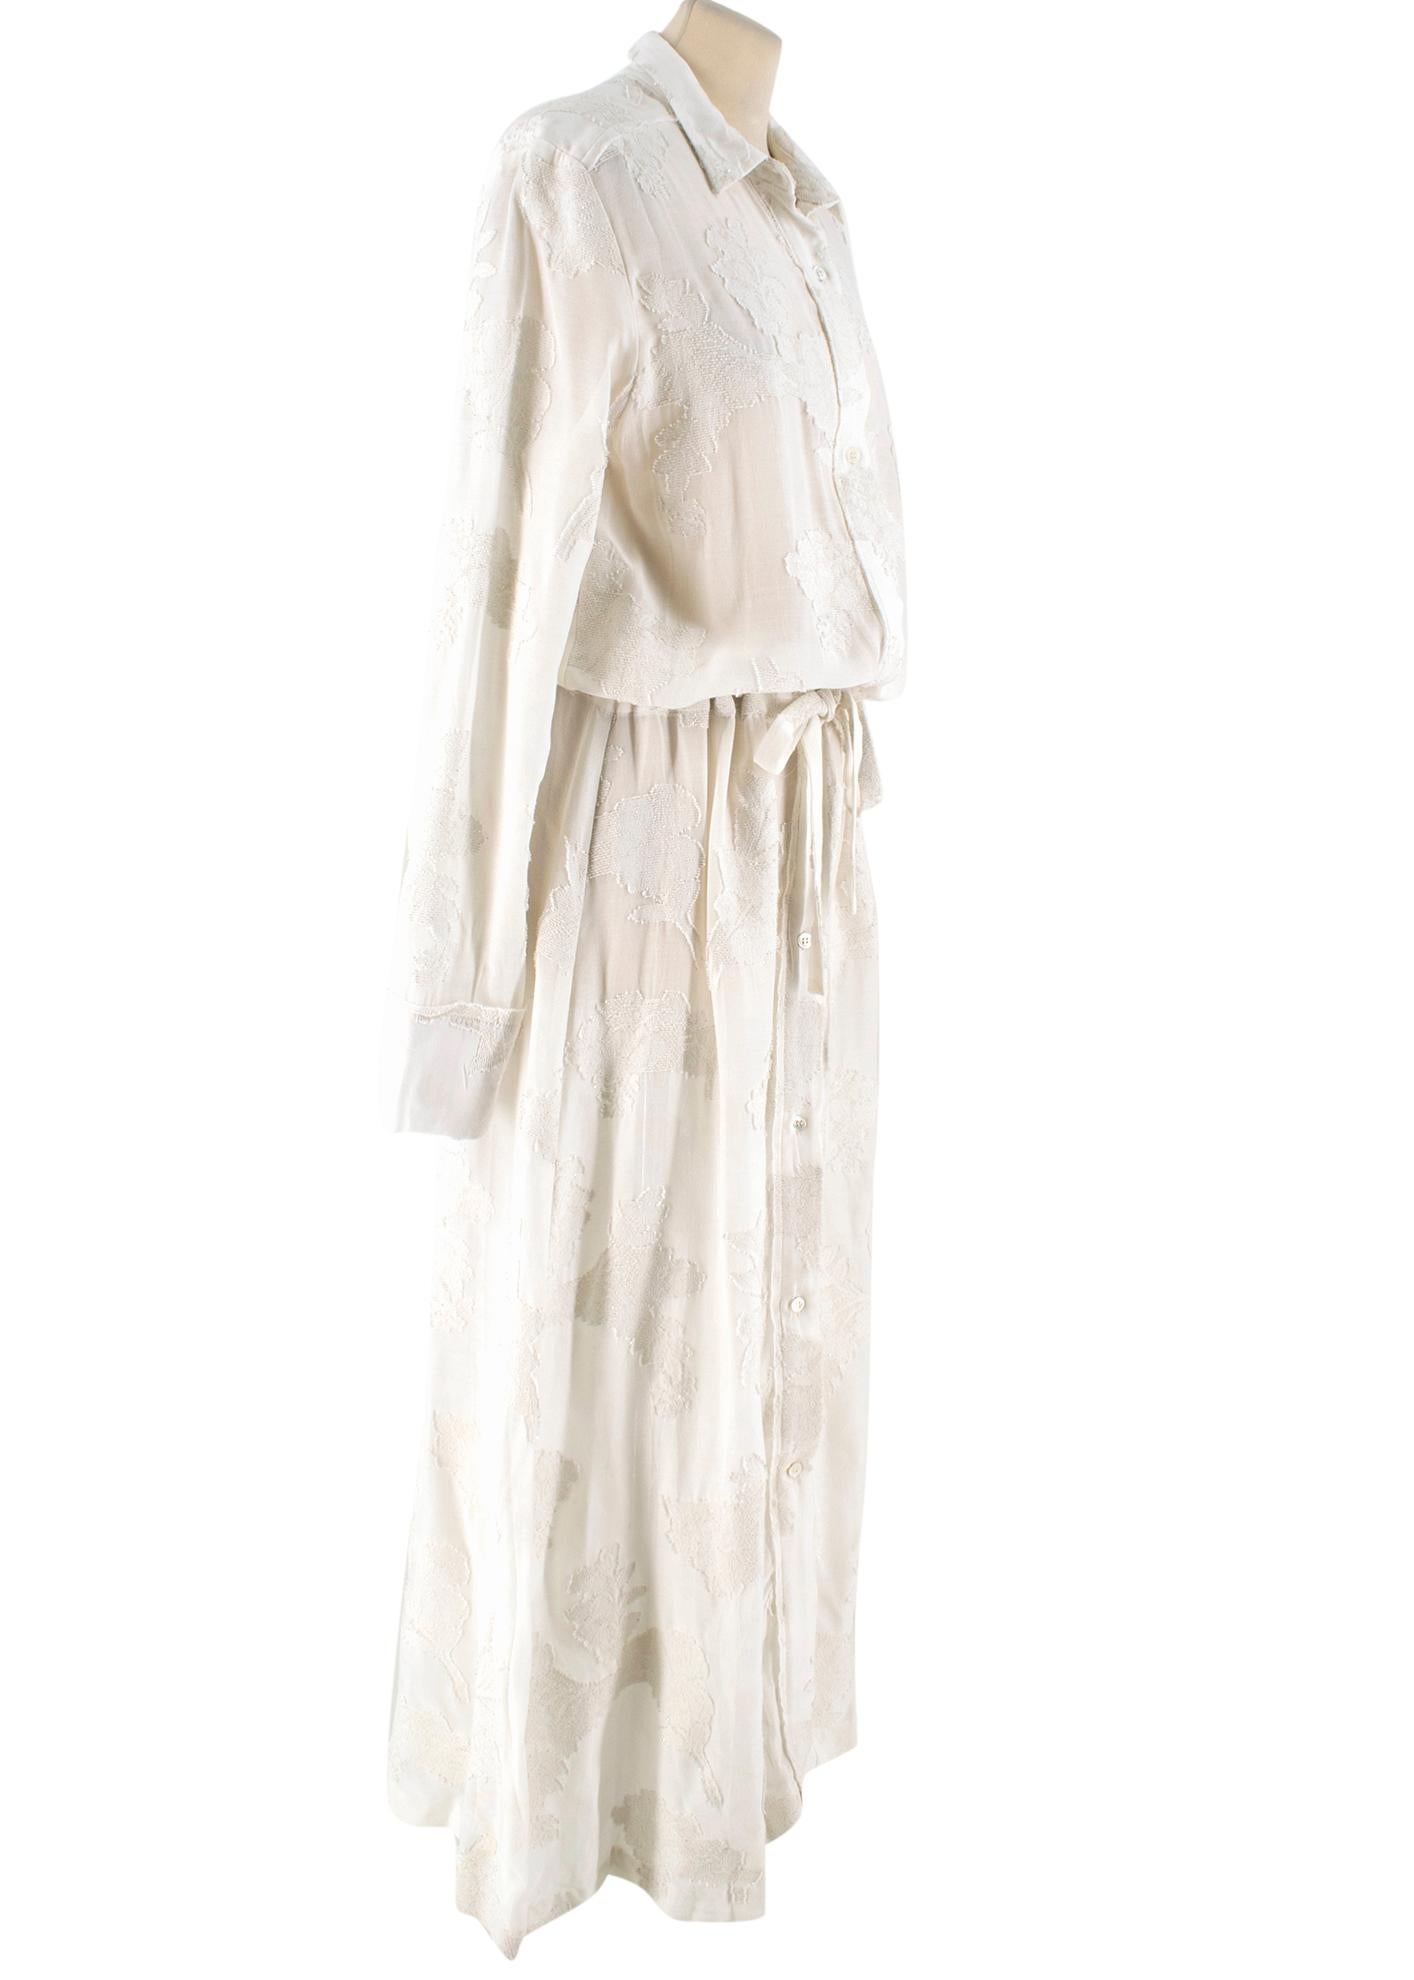 A.O.T.C. White Fil Coupe Maxi Dress

- White maxi dress
- Mid-weight
- Fil coupe 
- Pointed collar
- Centre-front button fastening
- Long sleeved, buttoned cuffs
- Drawstring waist
- 87% viscose, 12% cotton and 1% polyester.

Please note, these